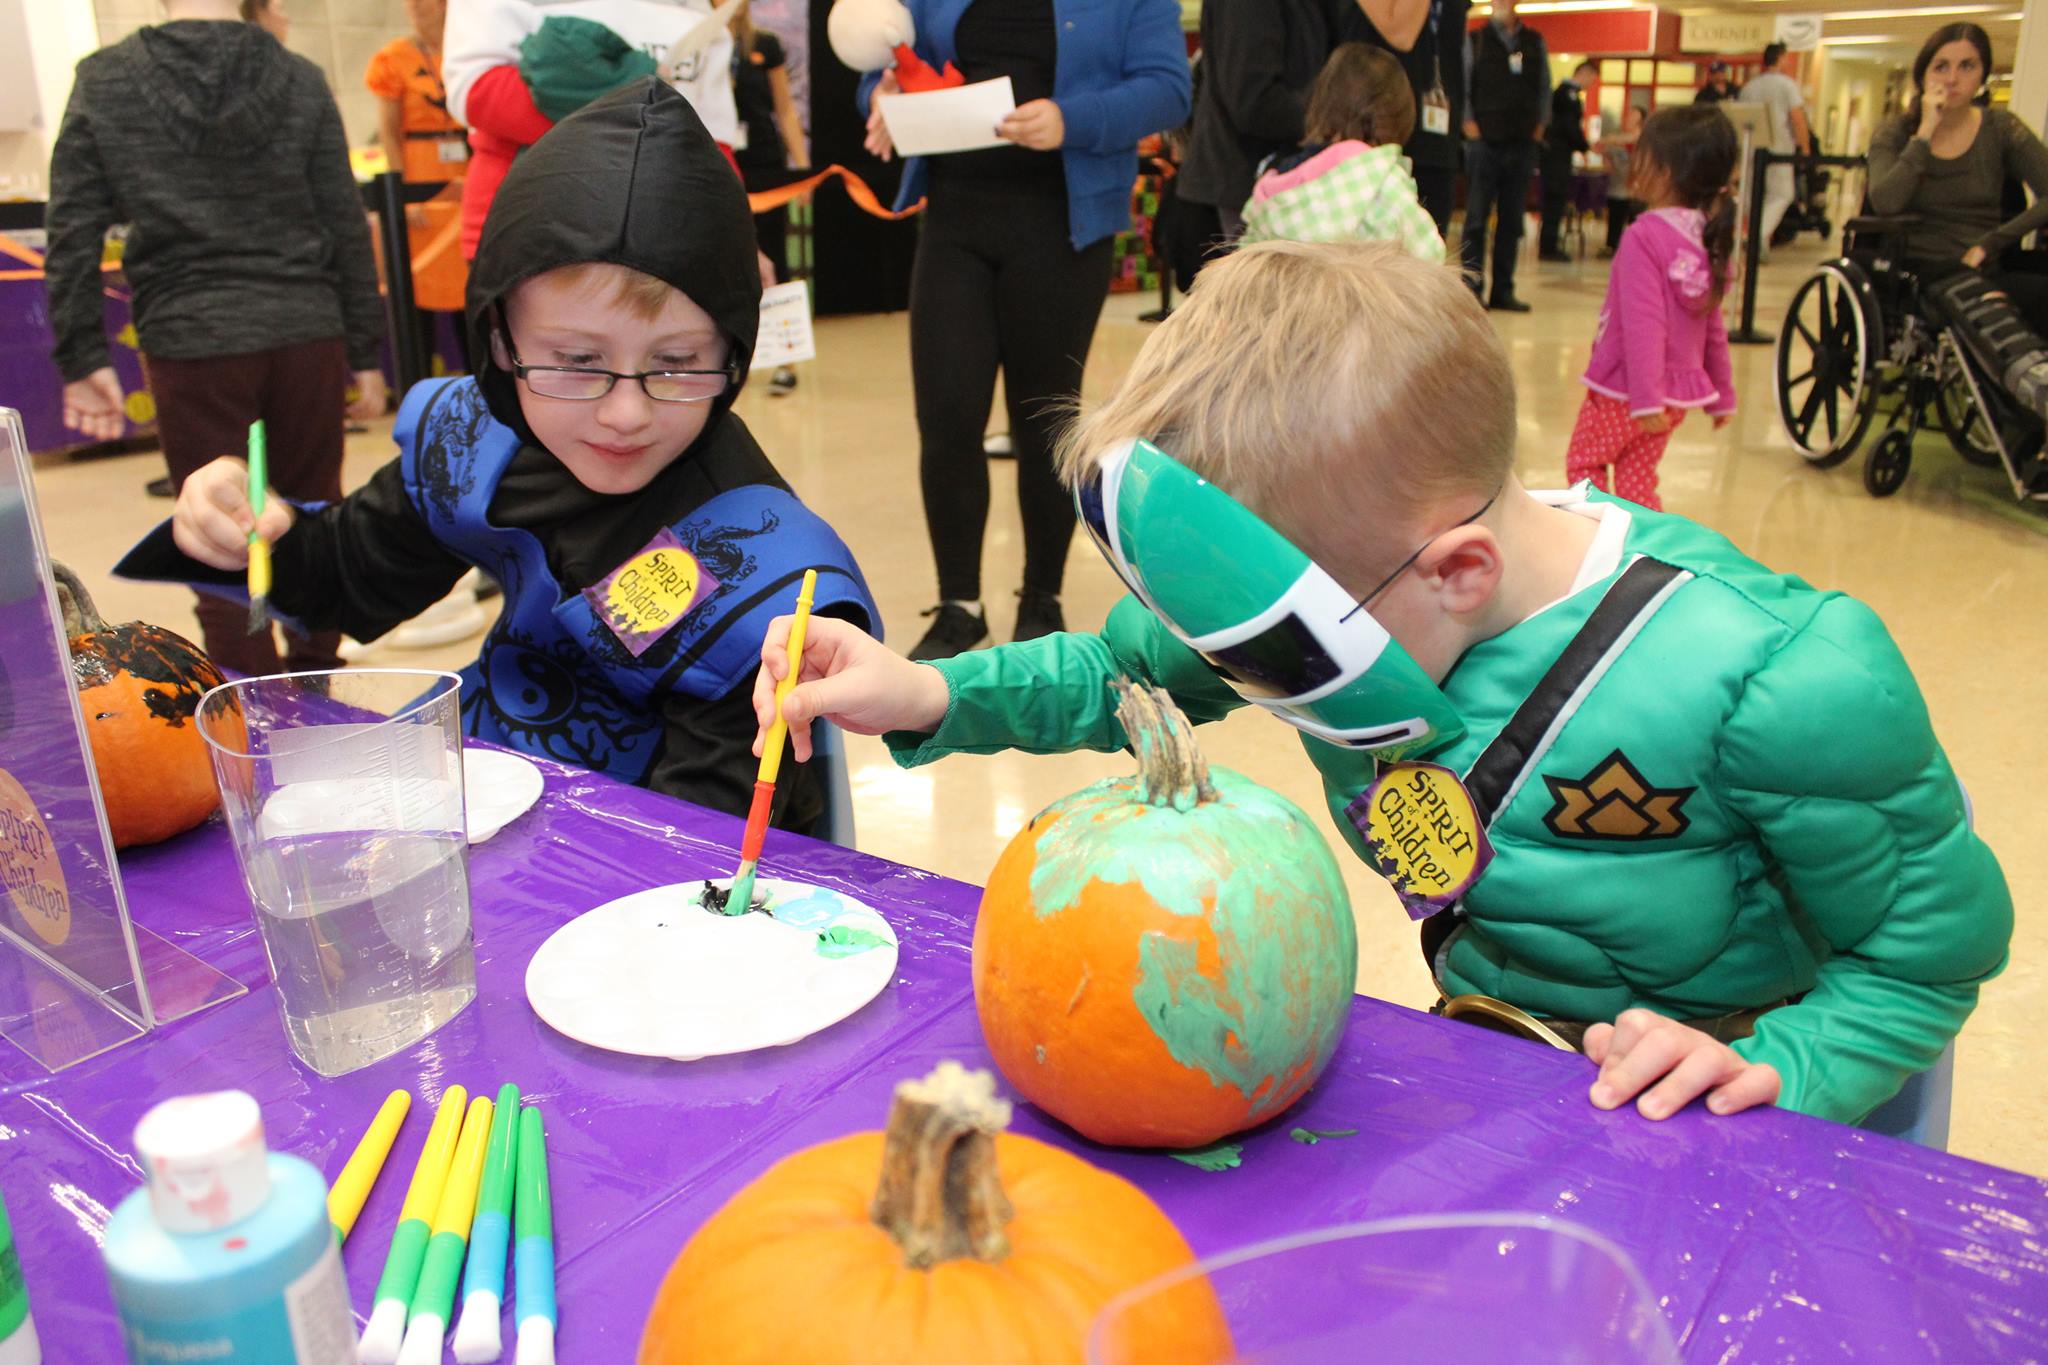 Two children doing crafts in costume